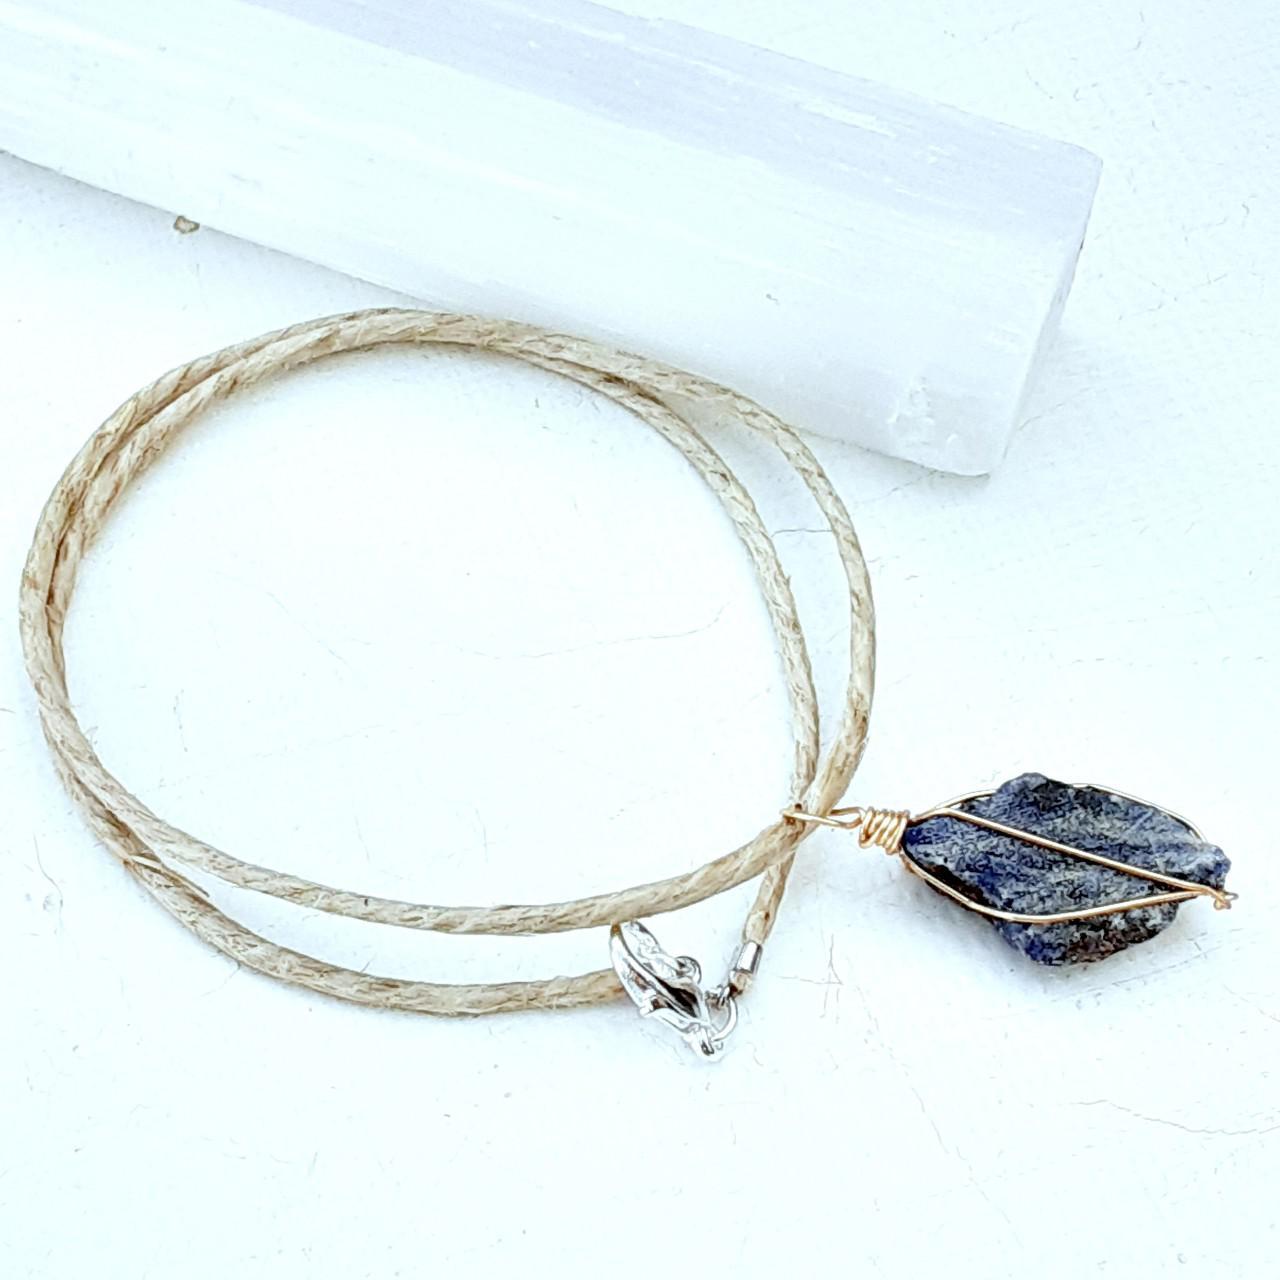 Product Image 2 - Hemp choker necklace
Gold wire wrapped